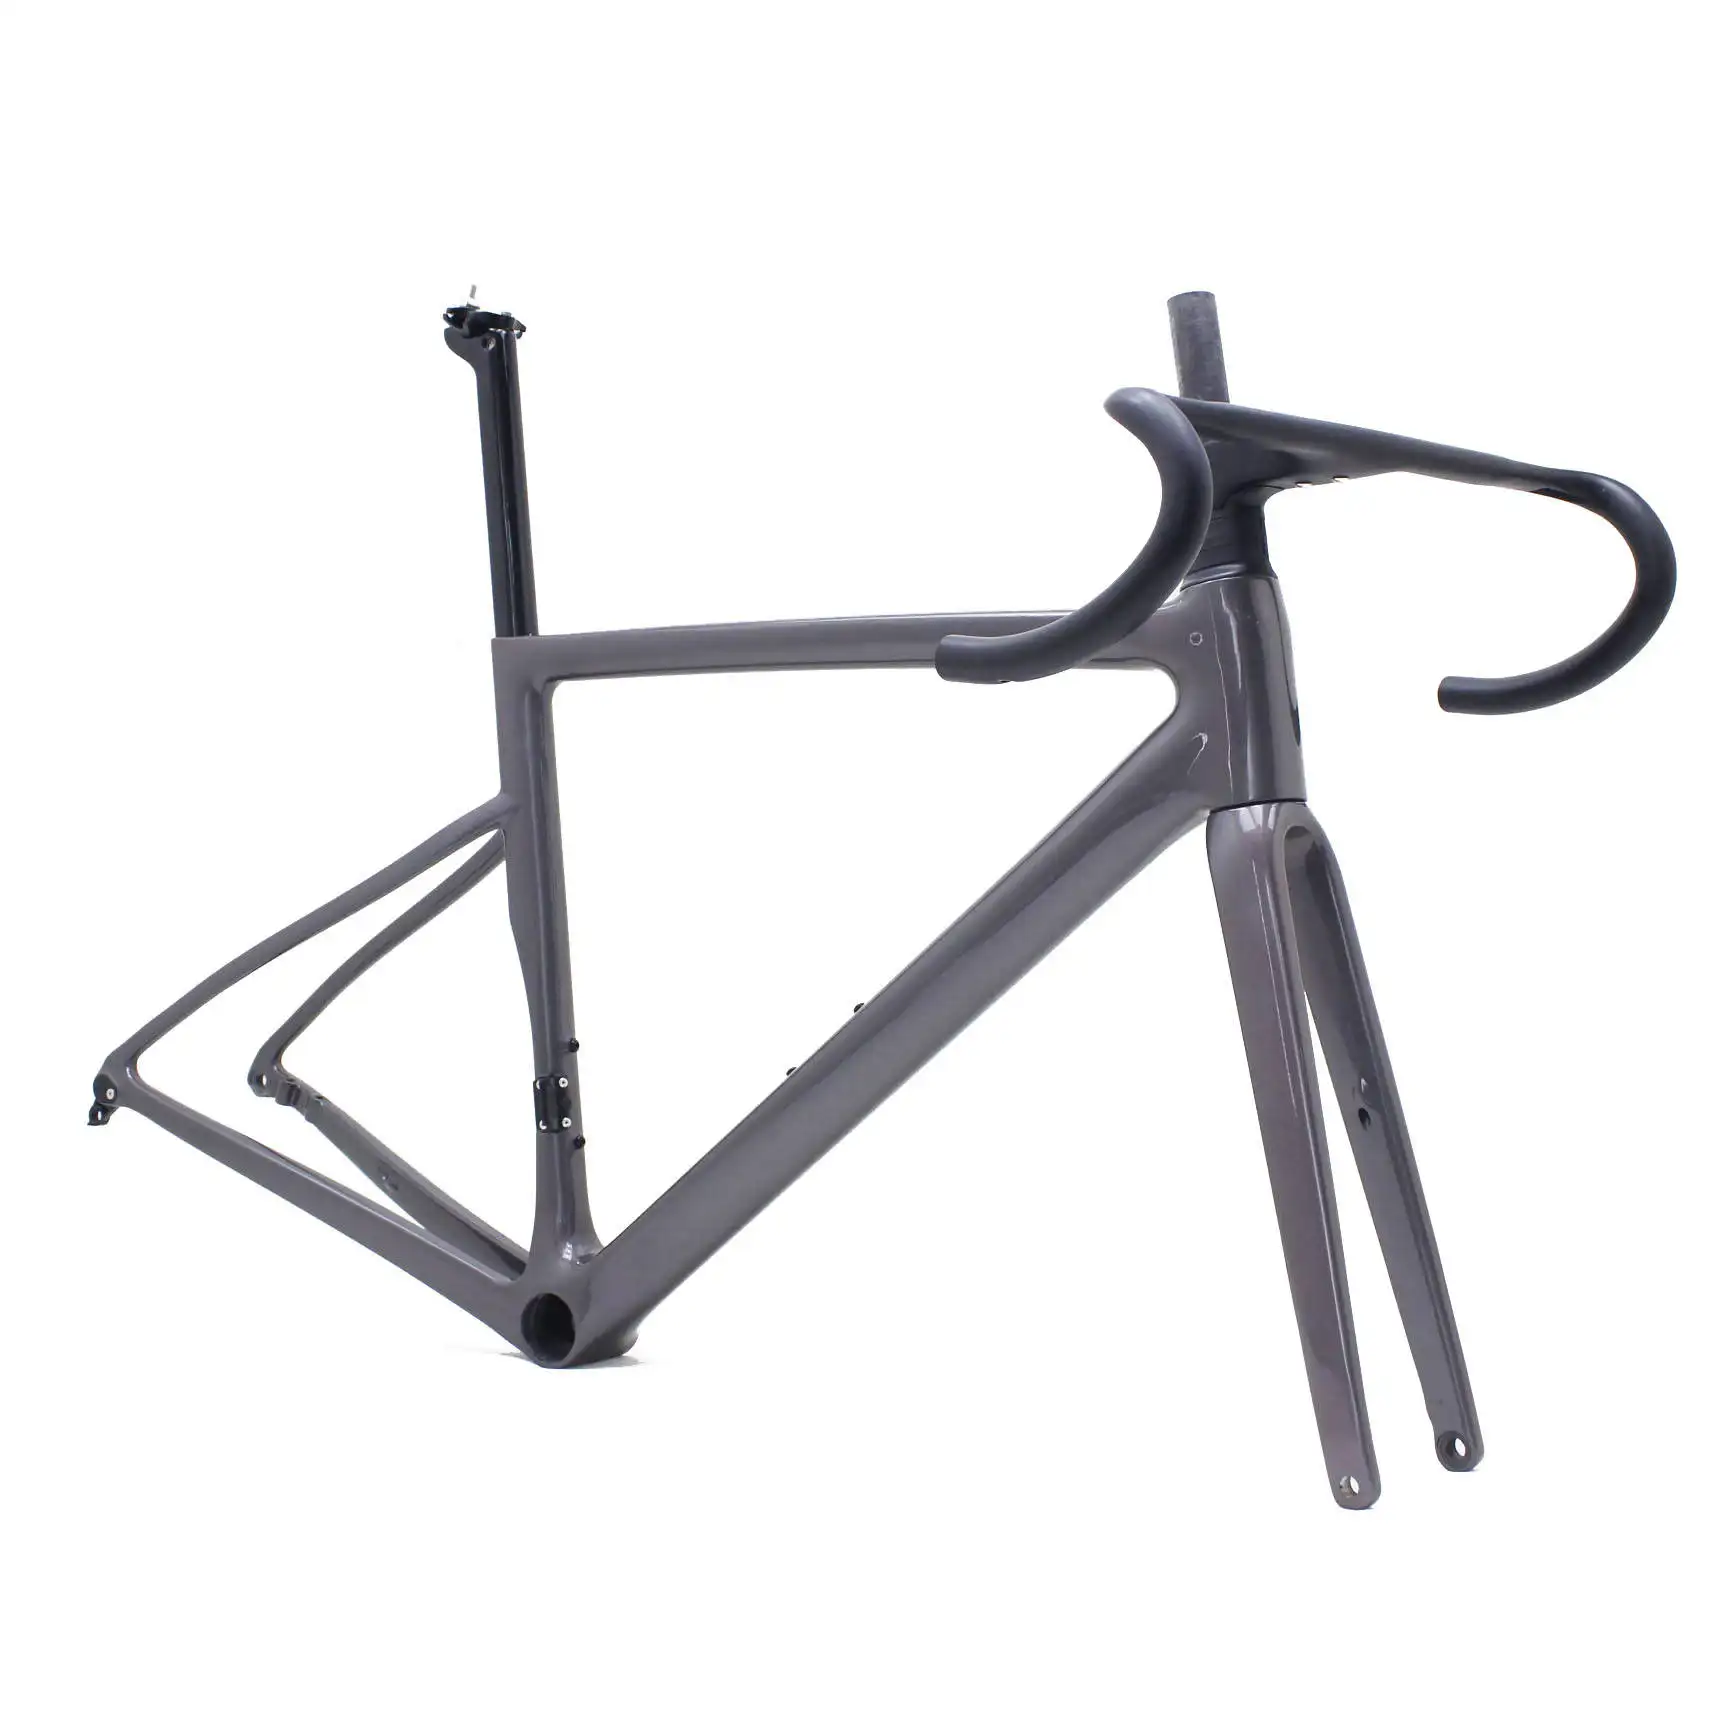 All inner cable new disc carbon frame Bicycle Frameset New EPS technology disc carbon frame available size 44/49/52/54/56CM